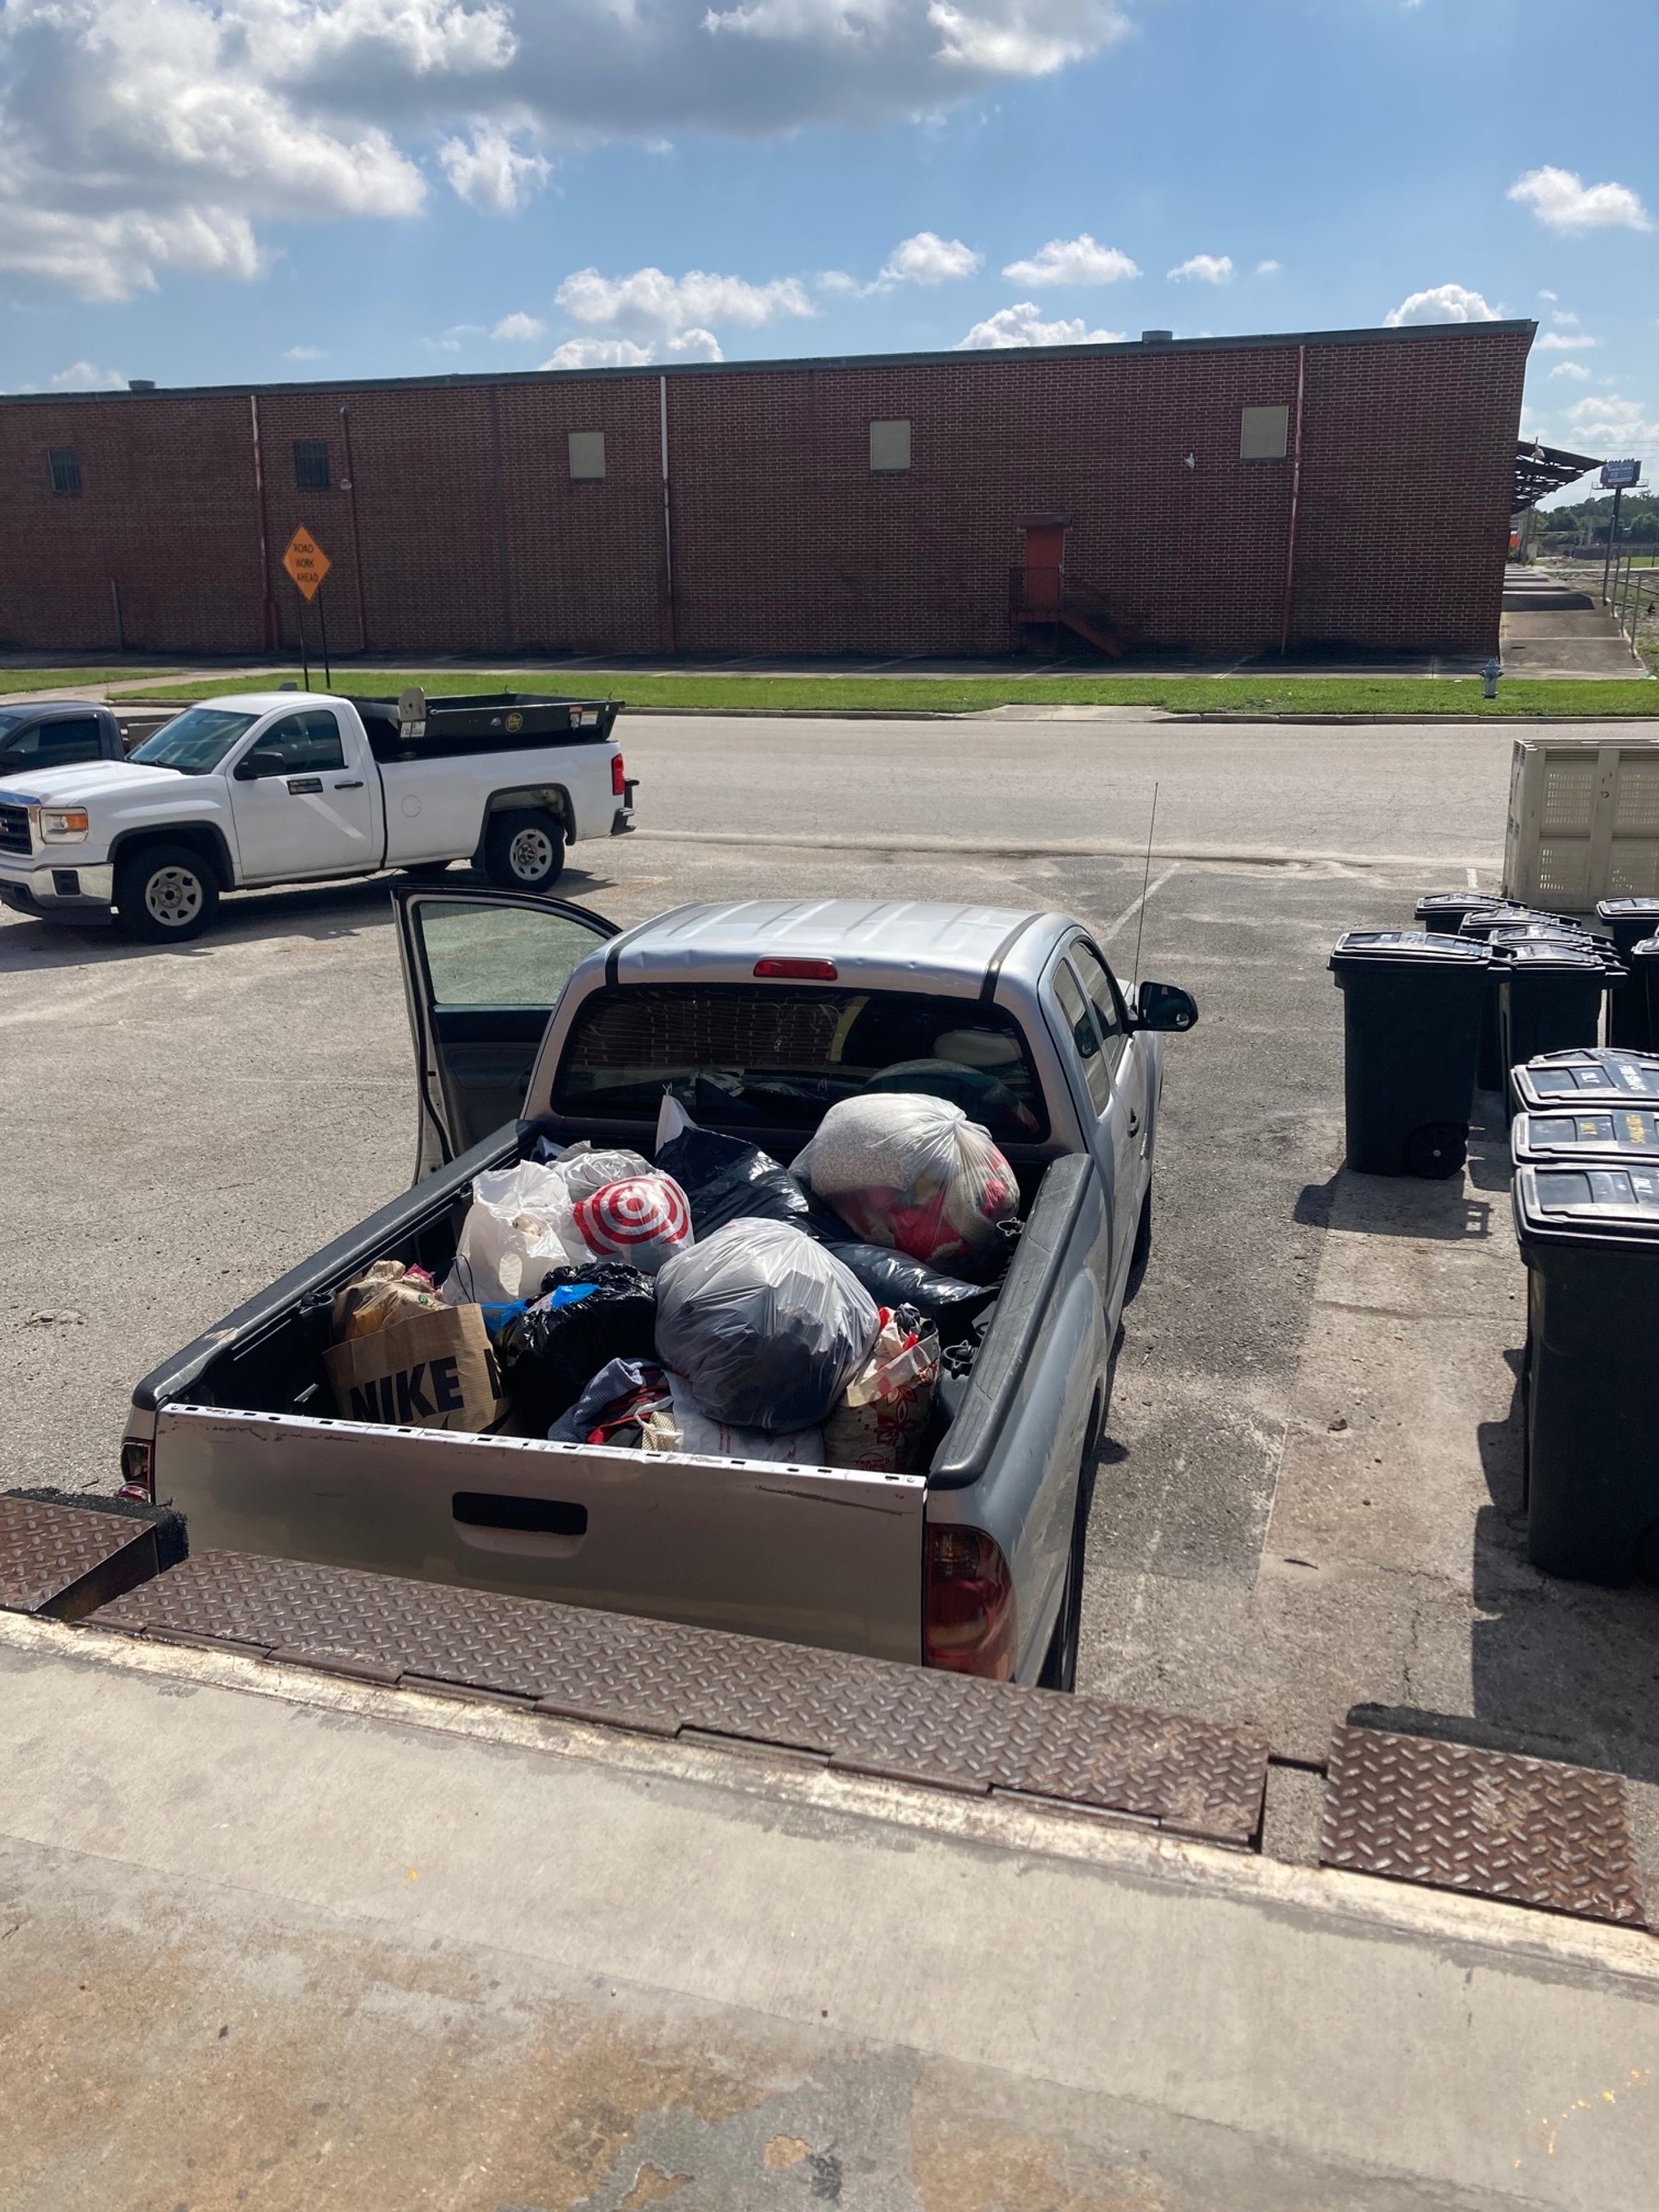 American Textiles Recycling Services pickup